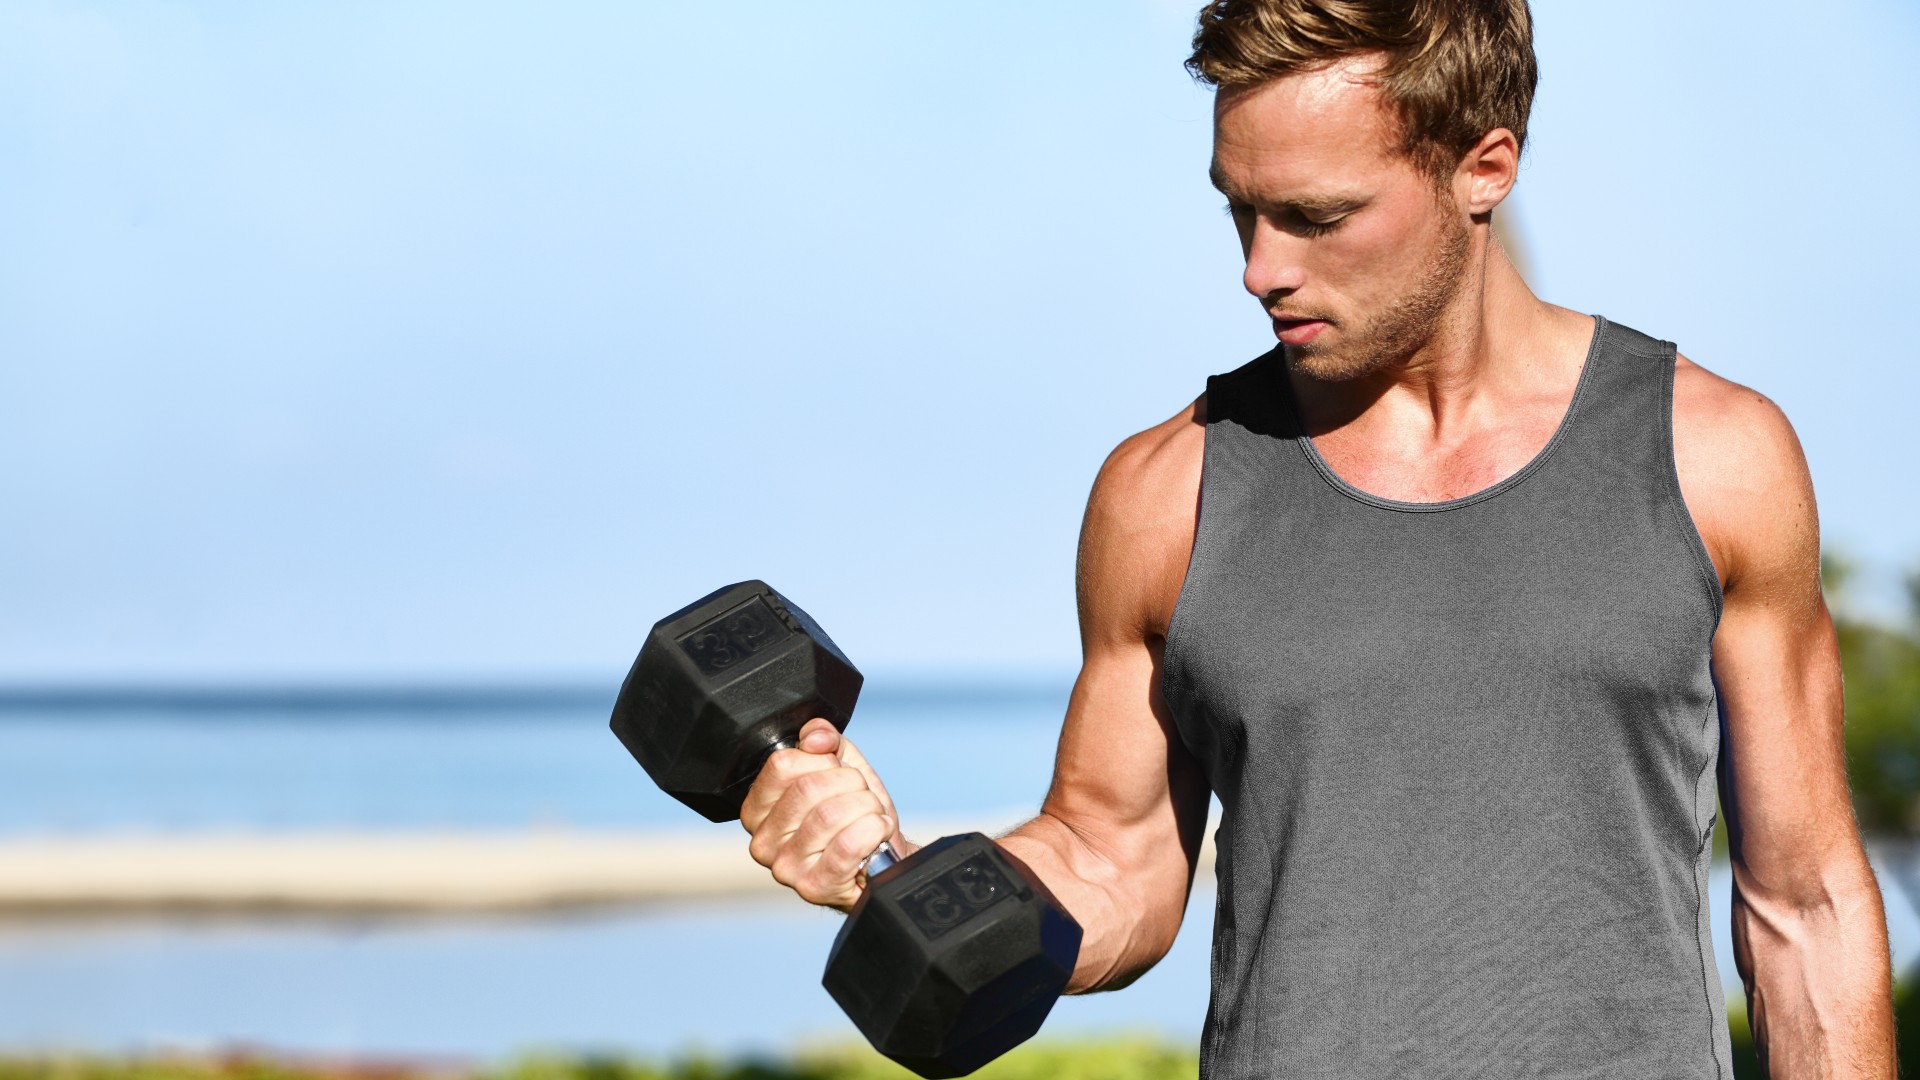 Best Arm Workouts with Dumbbells for Bigger Arms - V Shred